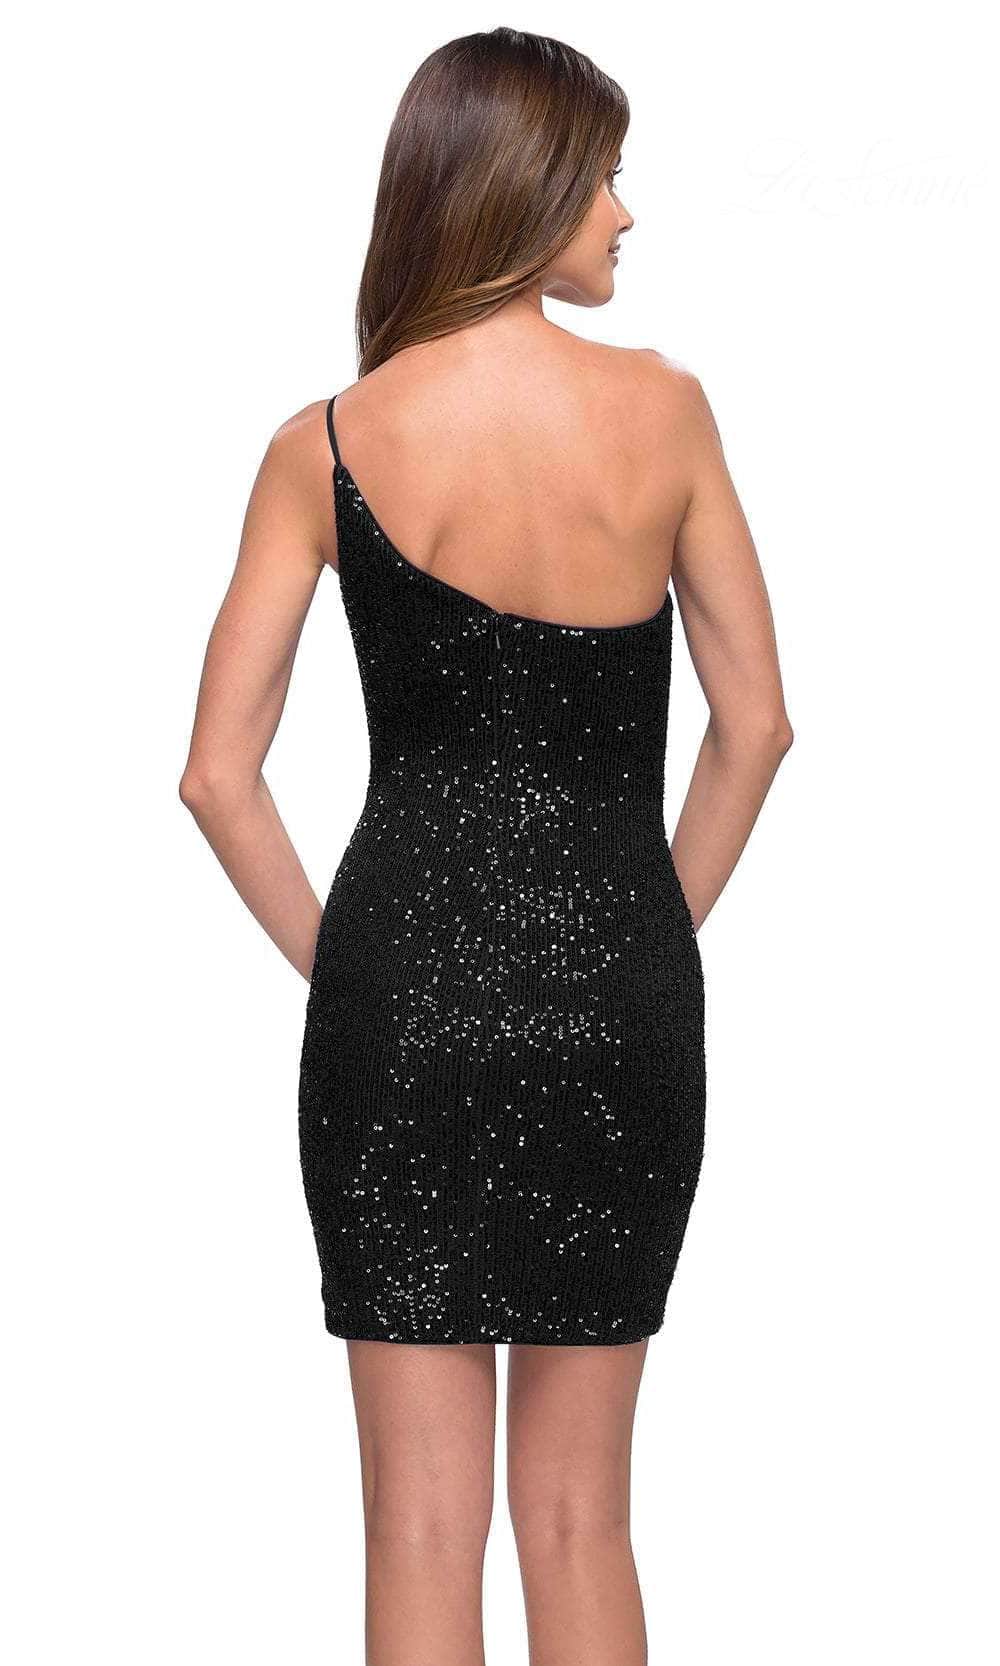 La Femme 30933 - Fitted Sequin Homecoming Dress with Slit Special Occasion Dress